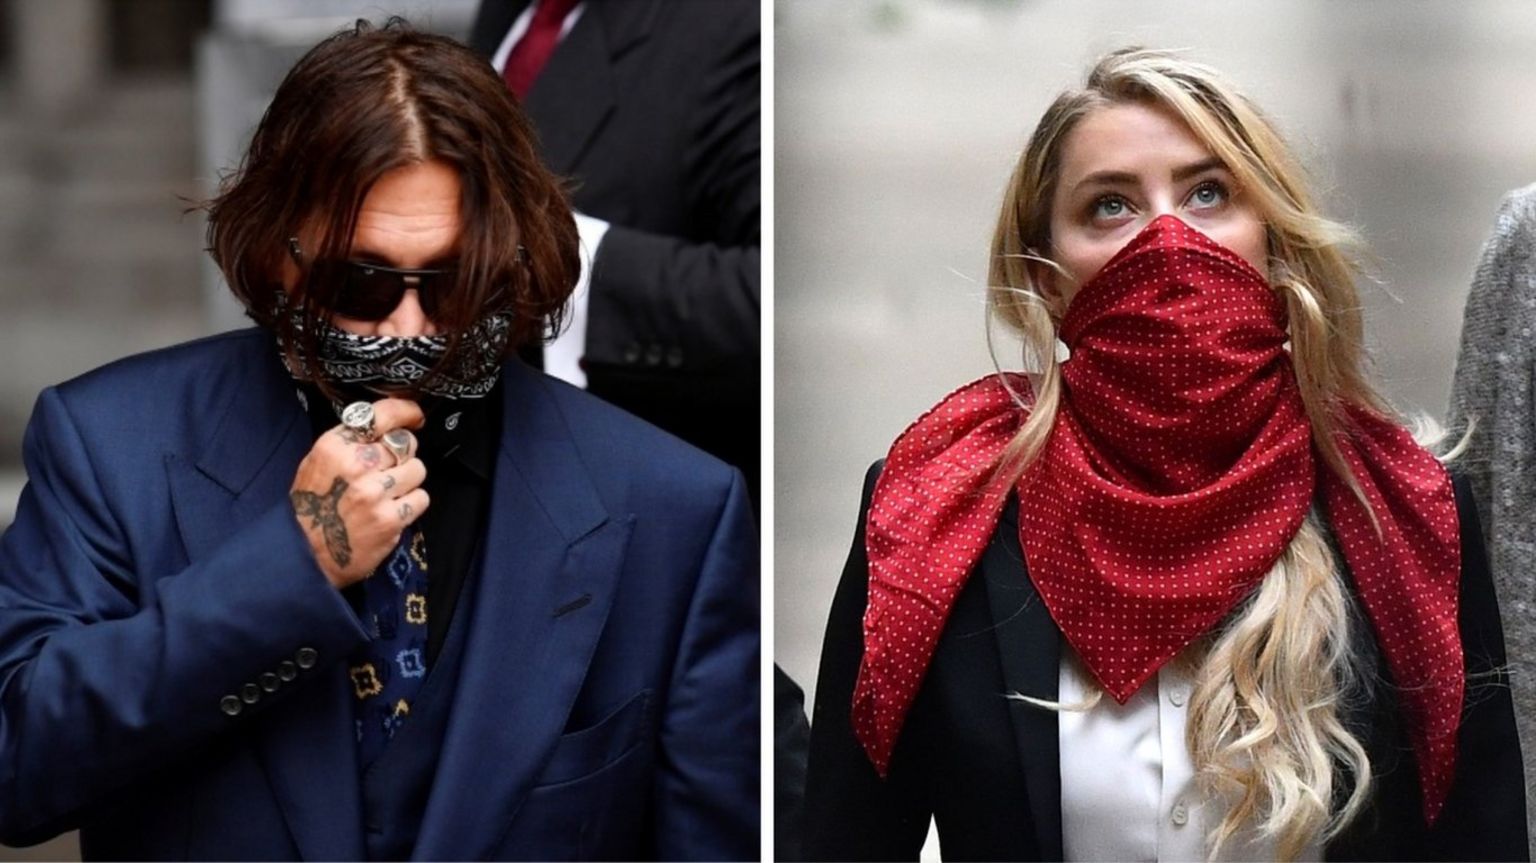 Johnny Depp and Amber Heard arrive at court in London on Thursday